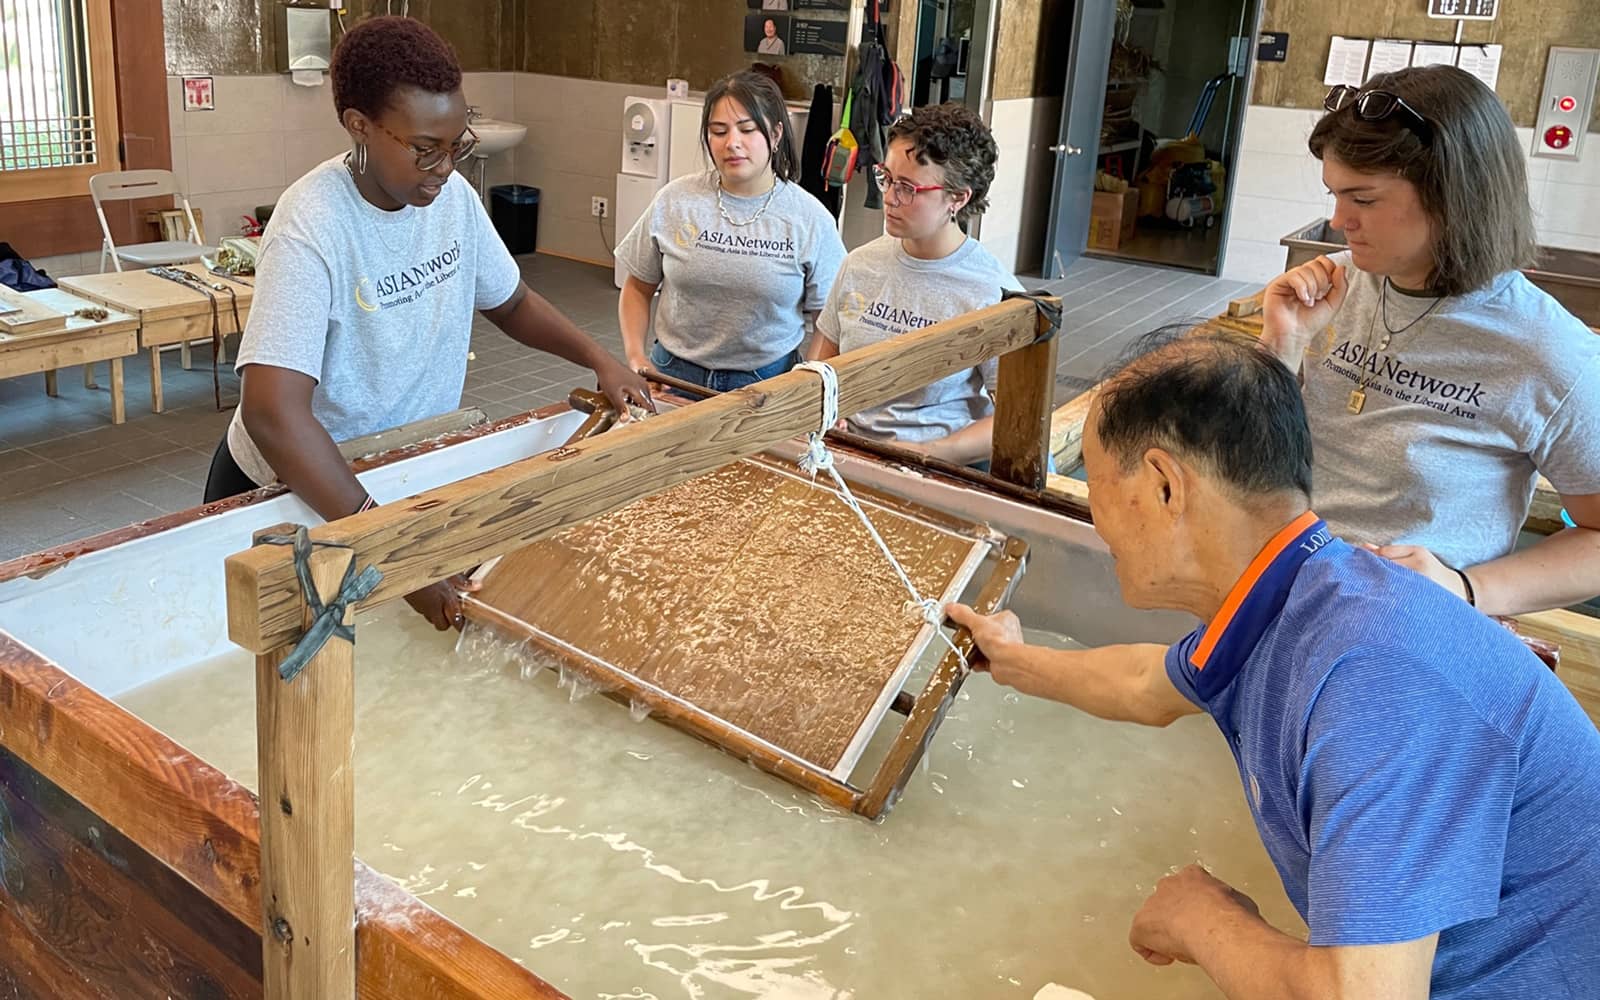 At the Jeonju Millennium Hanji Museum in Seoul, master paper maker Shintae Park (at bottom right) teaches Ayanna Njoroge ’24, Madai Huerta ’23, Isabella Gaetjens-Oleson ’23 and Joanna Locke ’24, pictured from left, how to make a traditional Korean paper.